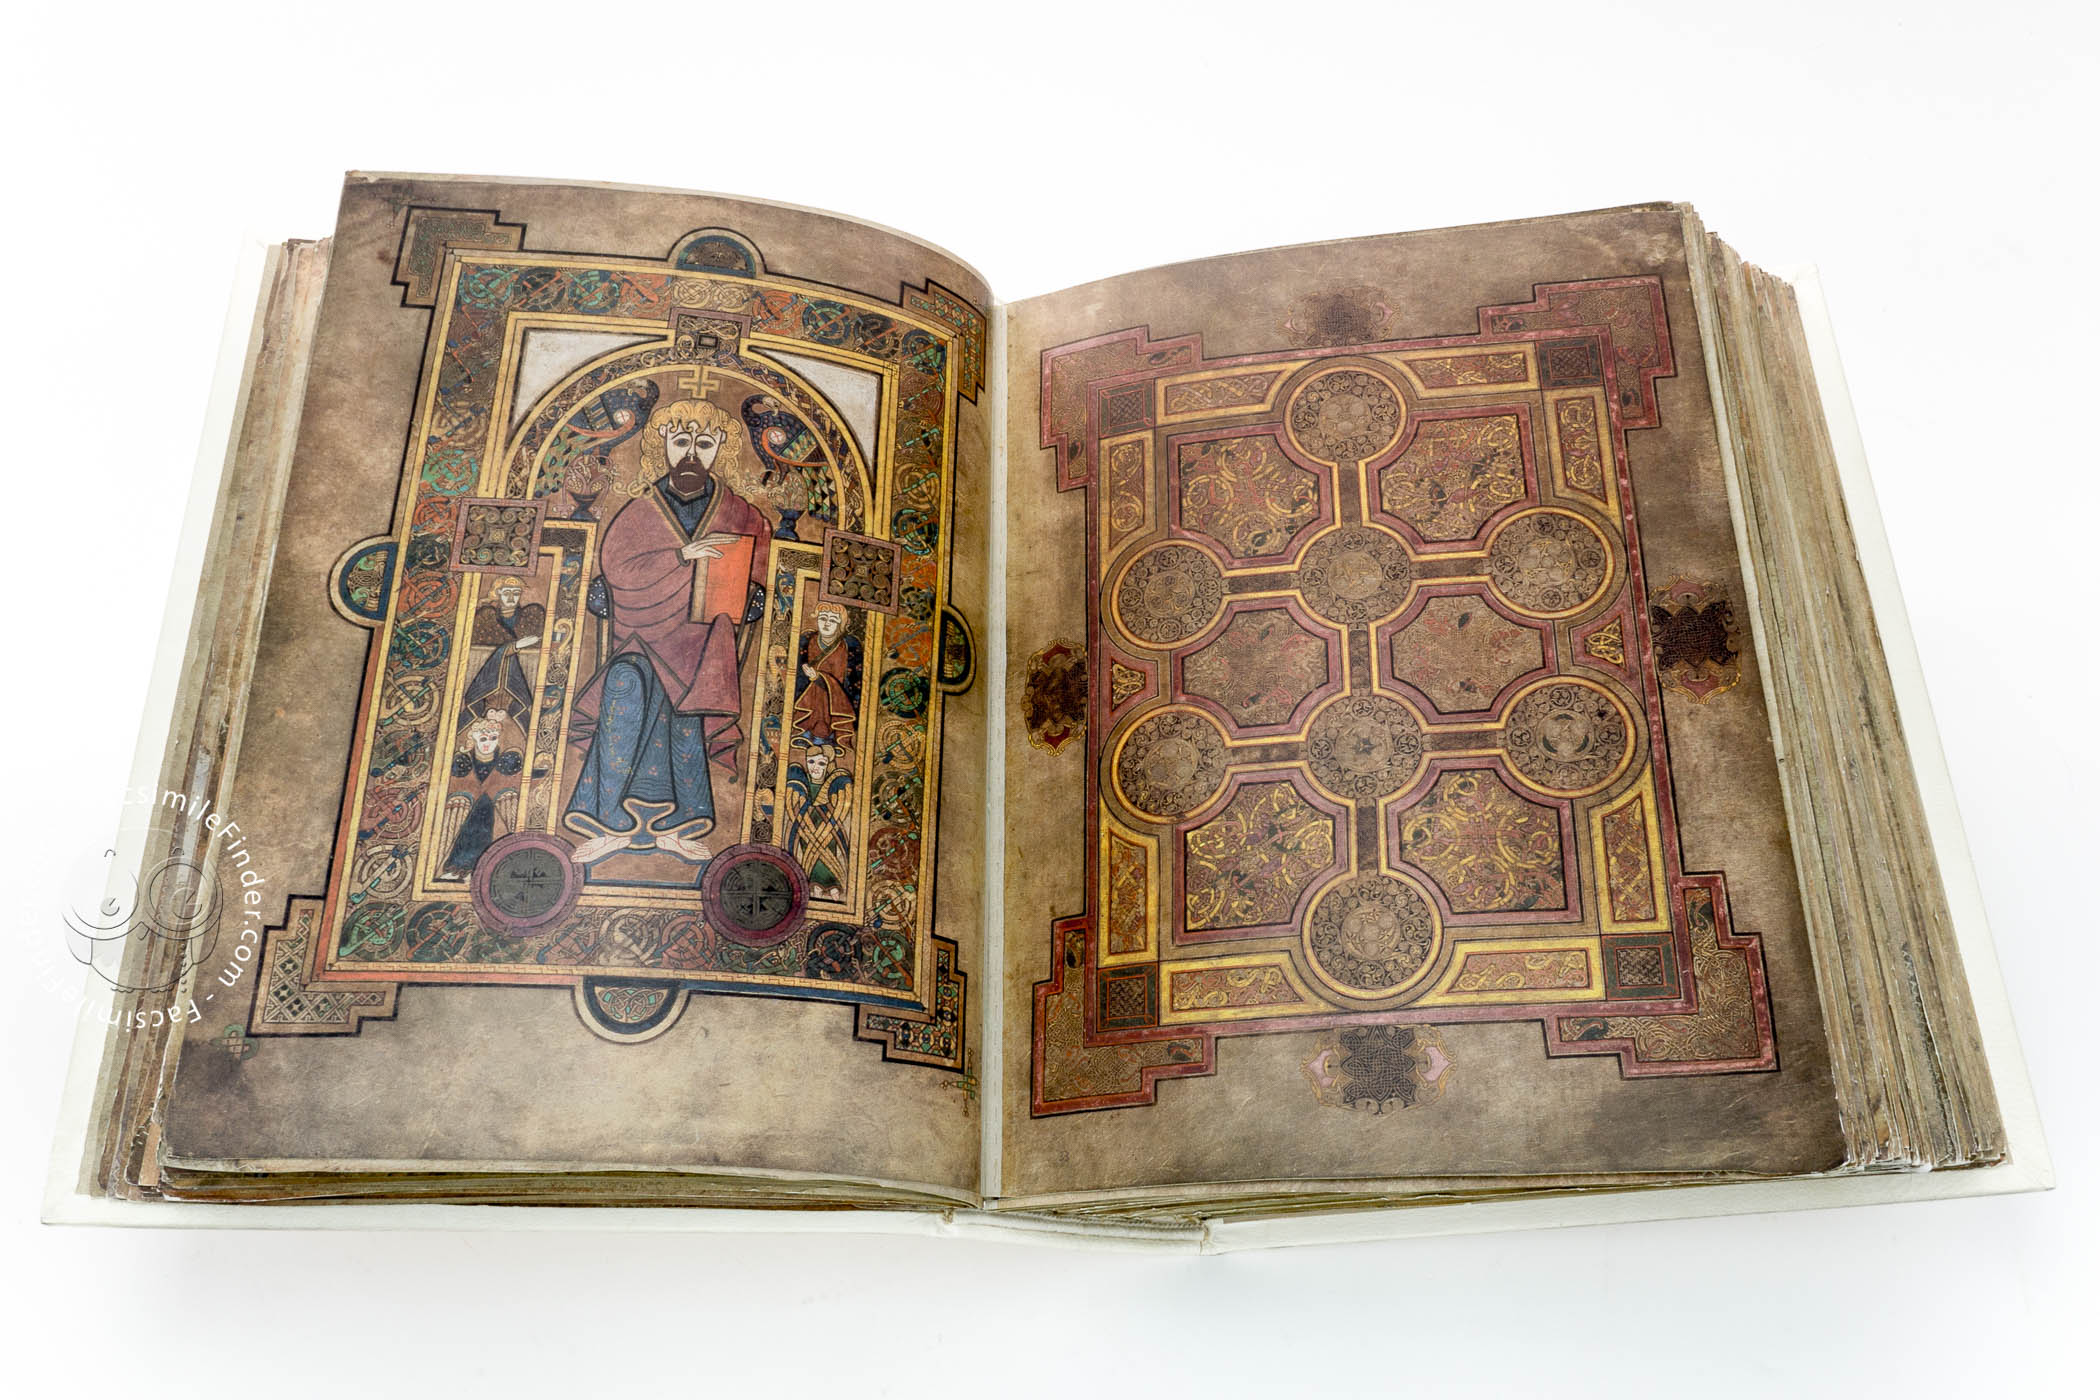 10 Things You Should Know About The Book Of Kells | Book 